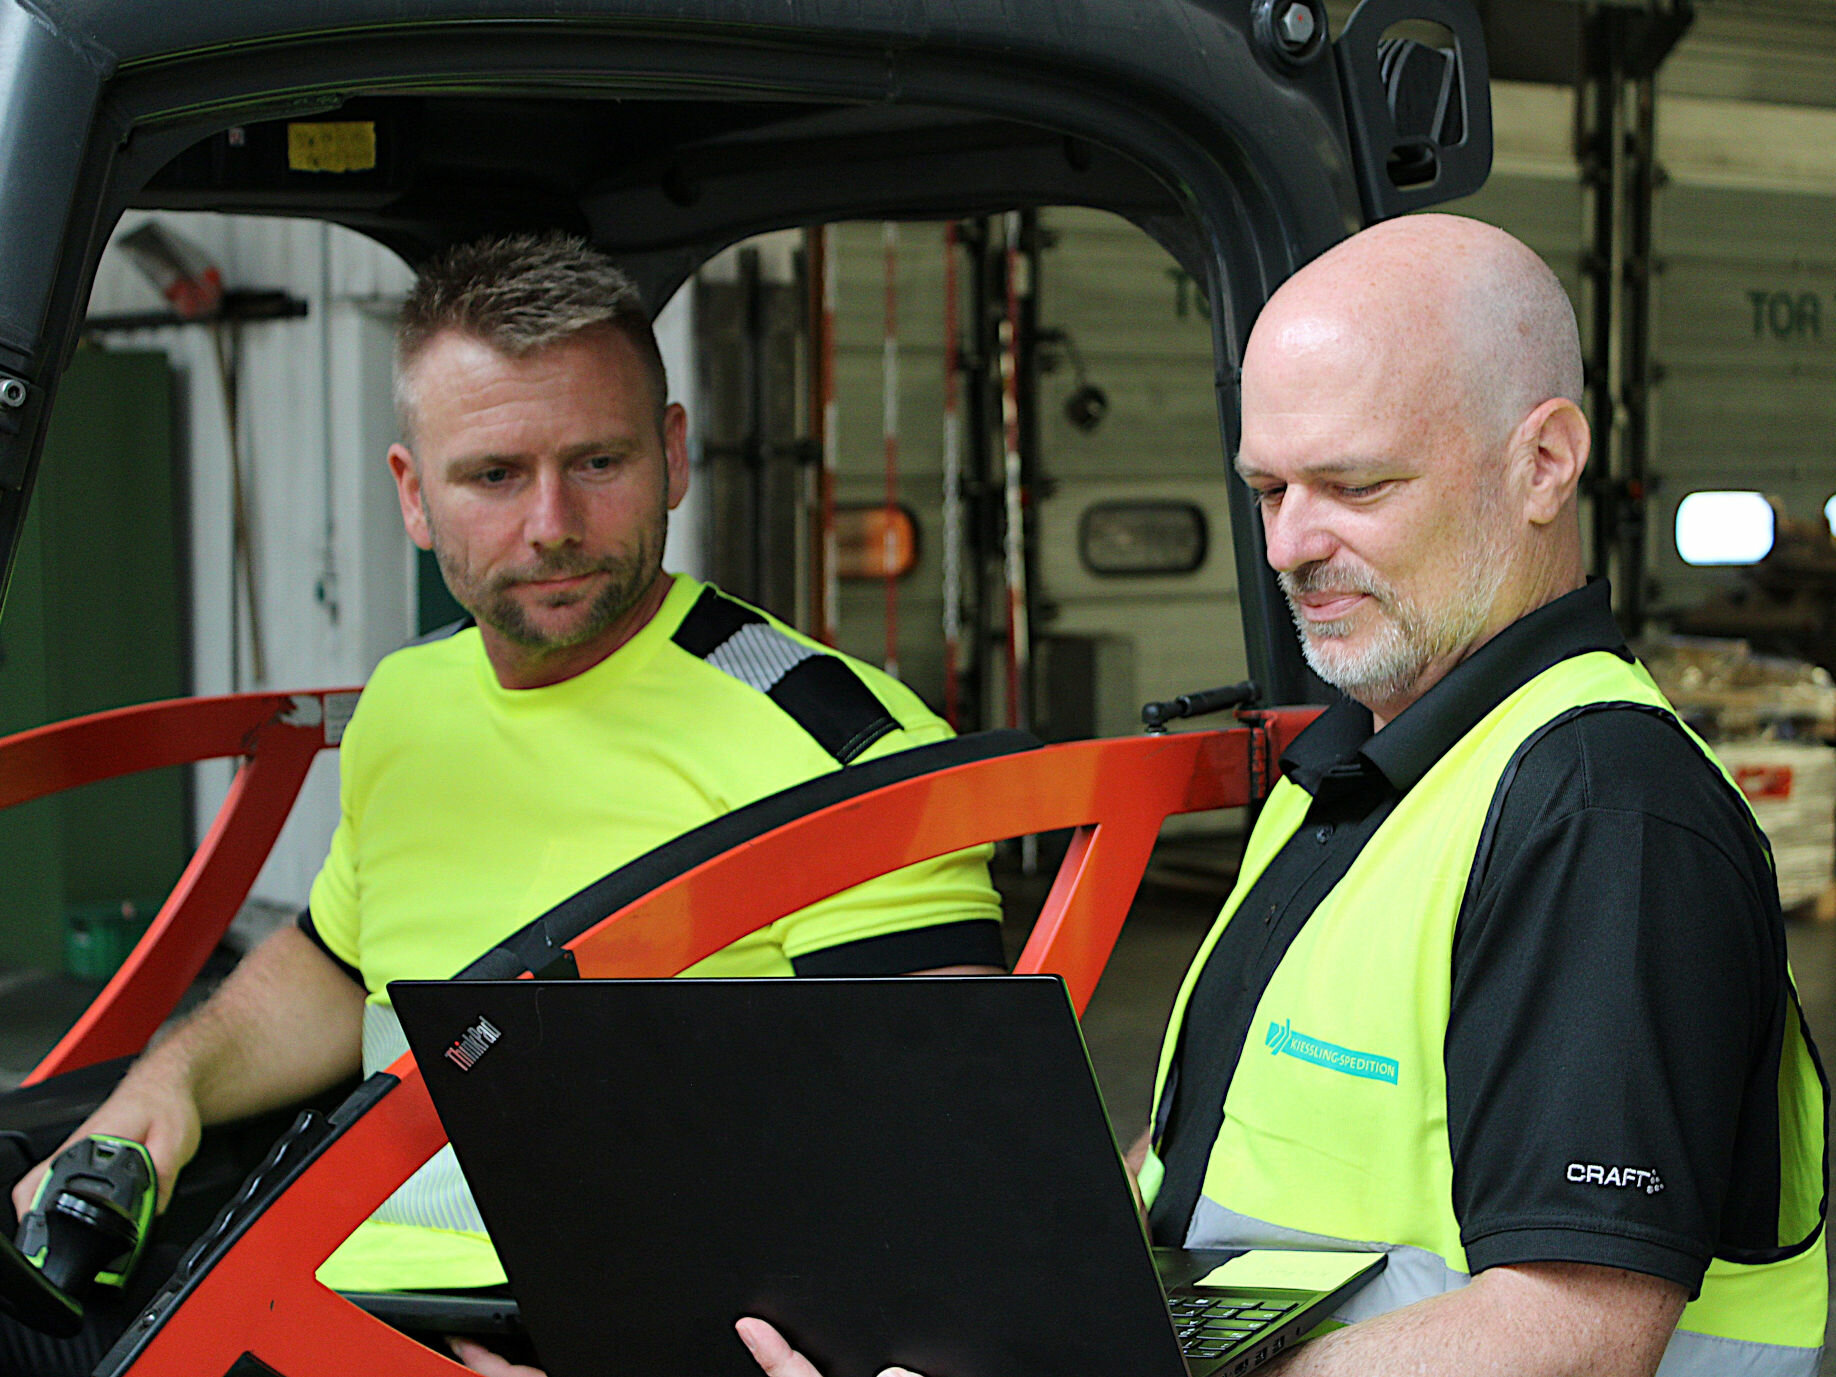 Workers from it and warehousing check the latest transport information on their computer